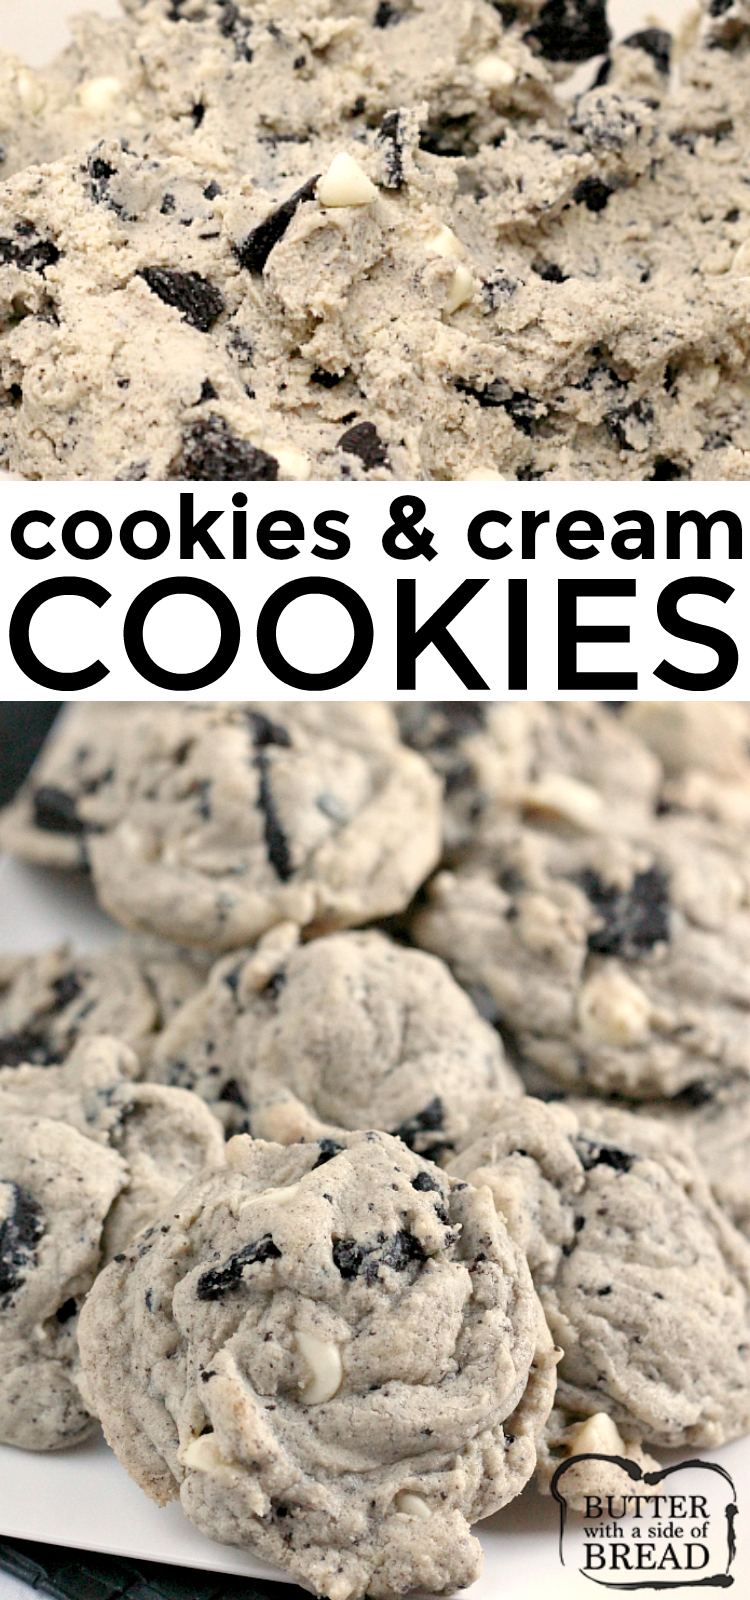 Cookies & Cream Cookies are made with Oreo pudding, white chocolate chips and chunks of Oreo cookies. This delicious cookie recipe yields perfectly soft and chewy cookies every time! 